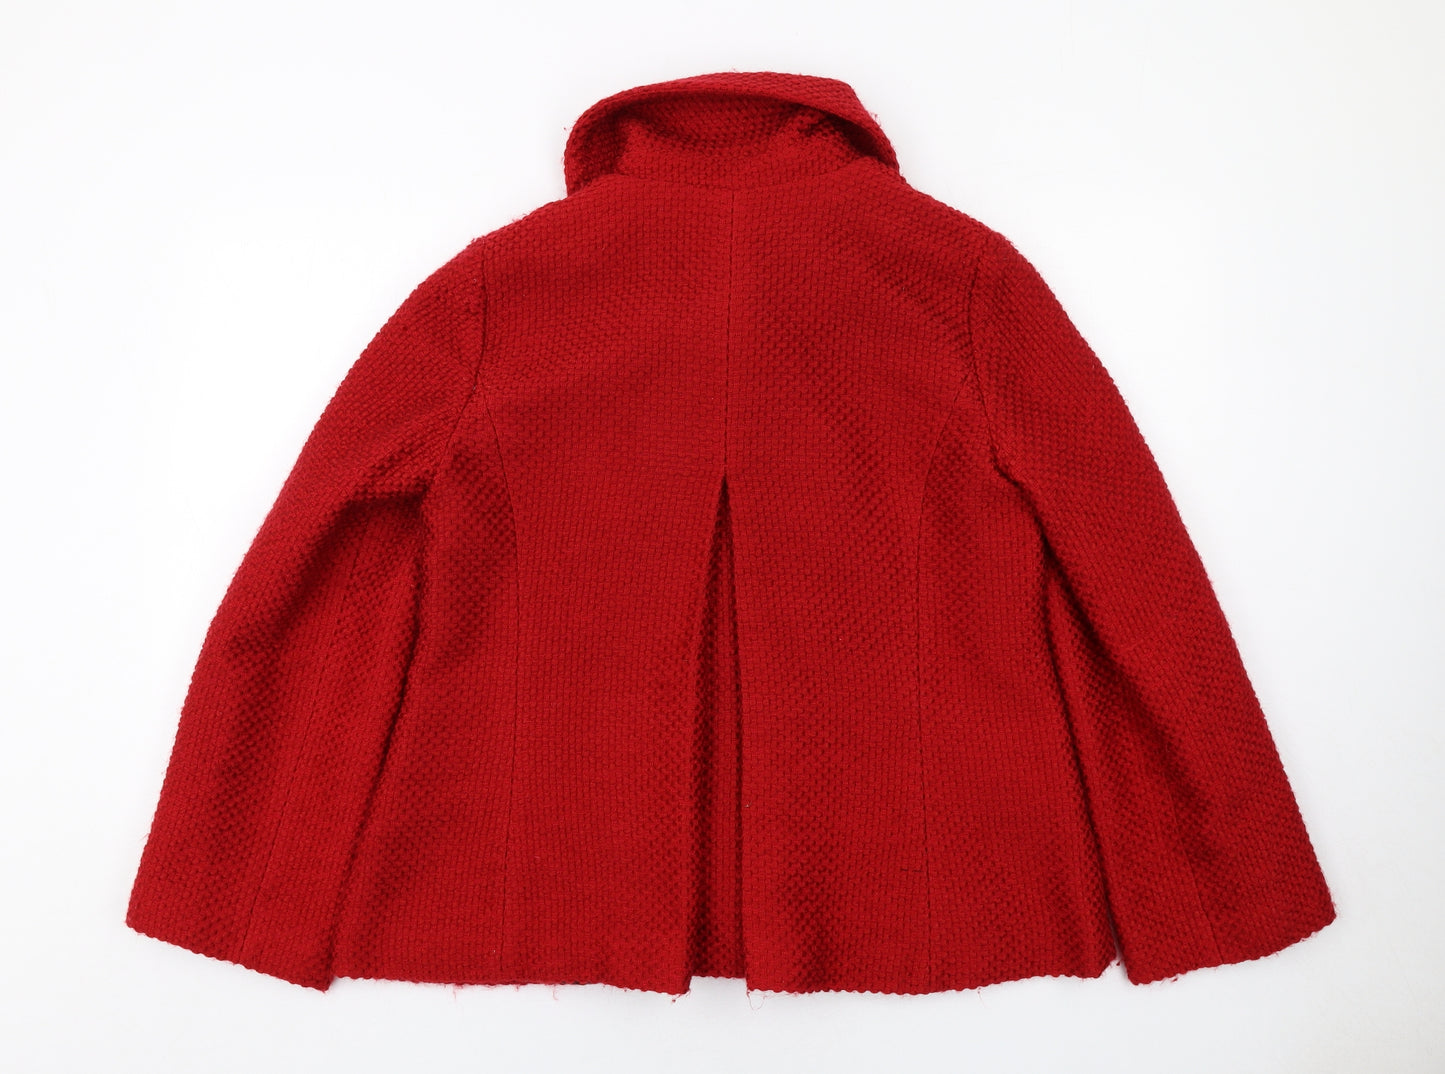 Per Una Womens Red Jacket Size 14 Snap - Collar Detail